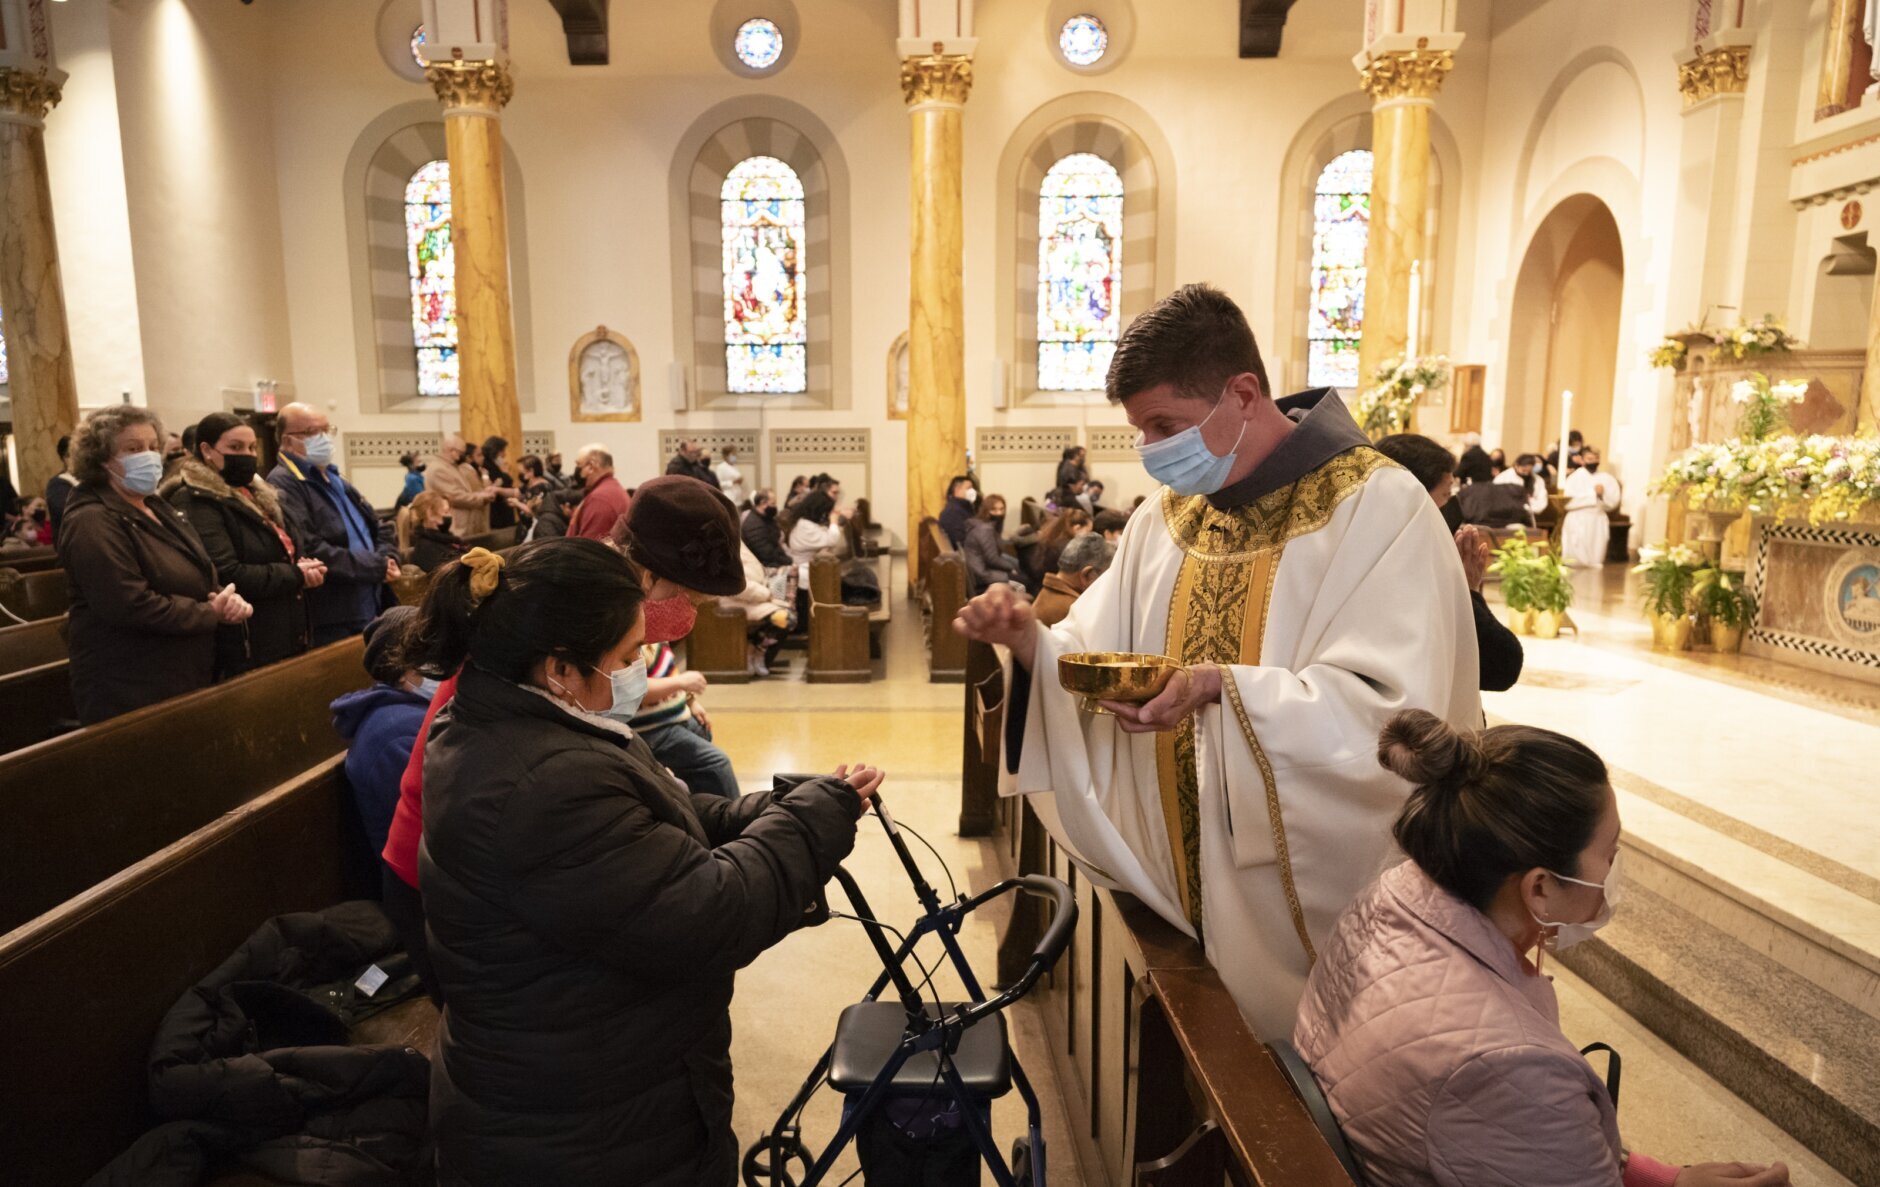 FILE - Rev. Russels Governale serves communion during a Spanish-language Easter service at St. Bartholomew Roman Catholic Church, which lost 80 of its members to COVID-19, Sunday, April 4, 2021, in New York. This year, in a rare convergence, Judaism’s Passover, Christianity’s Easter and Islam’s holy month of Ramadan are interlapping in April with holy days for Buddhists, Baha’is, Sikhs, Jains and Hindus, offering different faith groups a chance to share meals and rituals in a range of interfaith events. (AP Photo/Mark Lennihan)